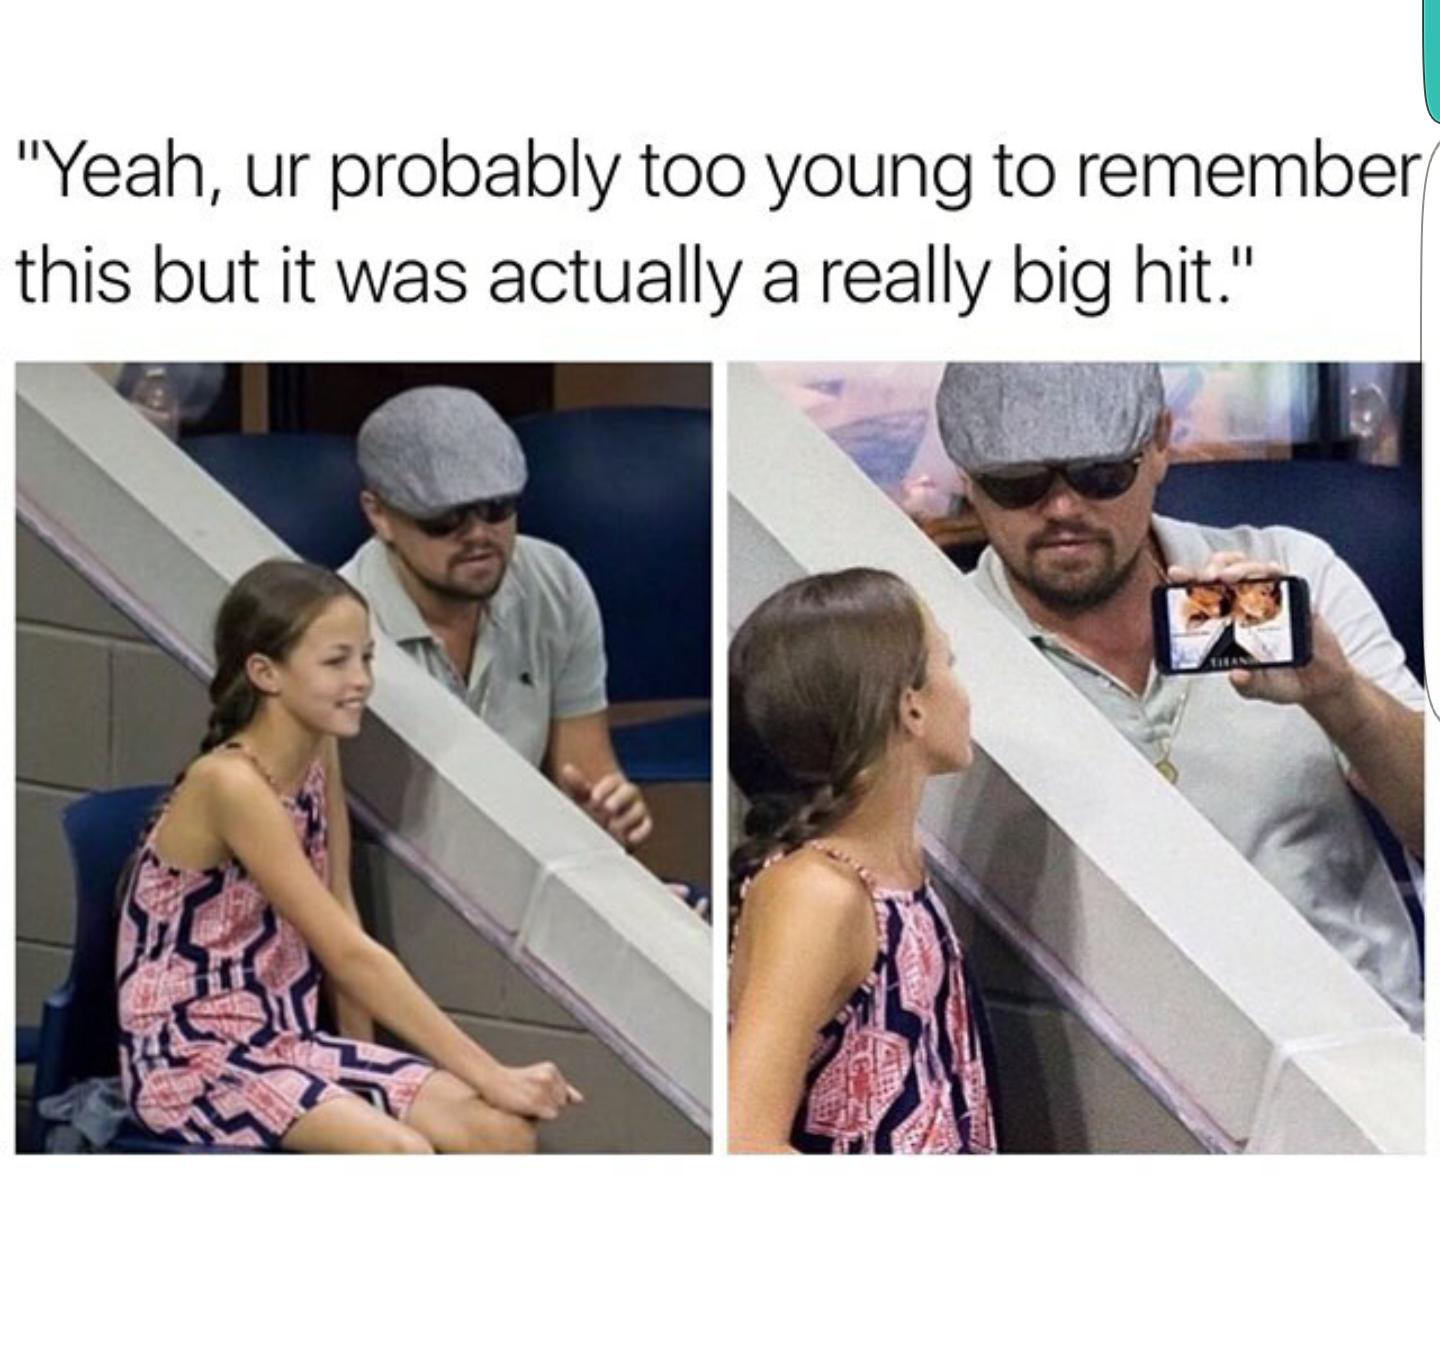 too young dank memes - "Yeah, ur probably too young to remember this but it was actually a really big hit."